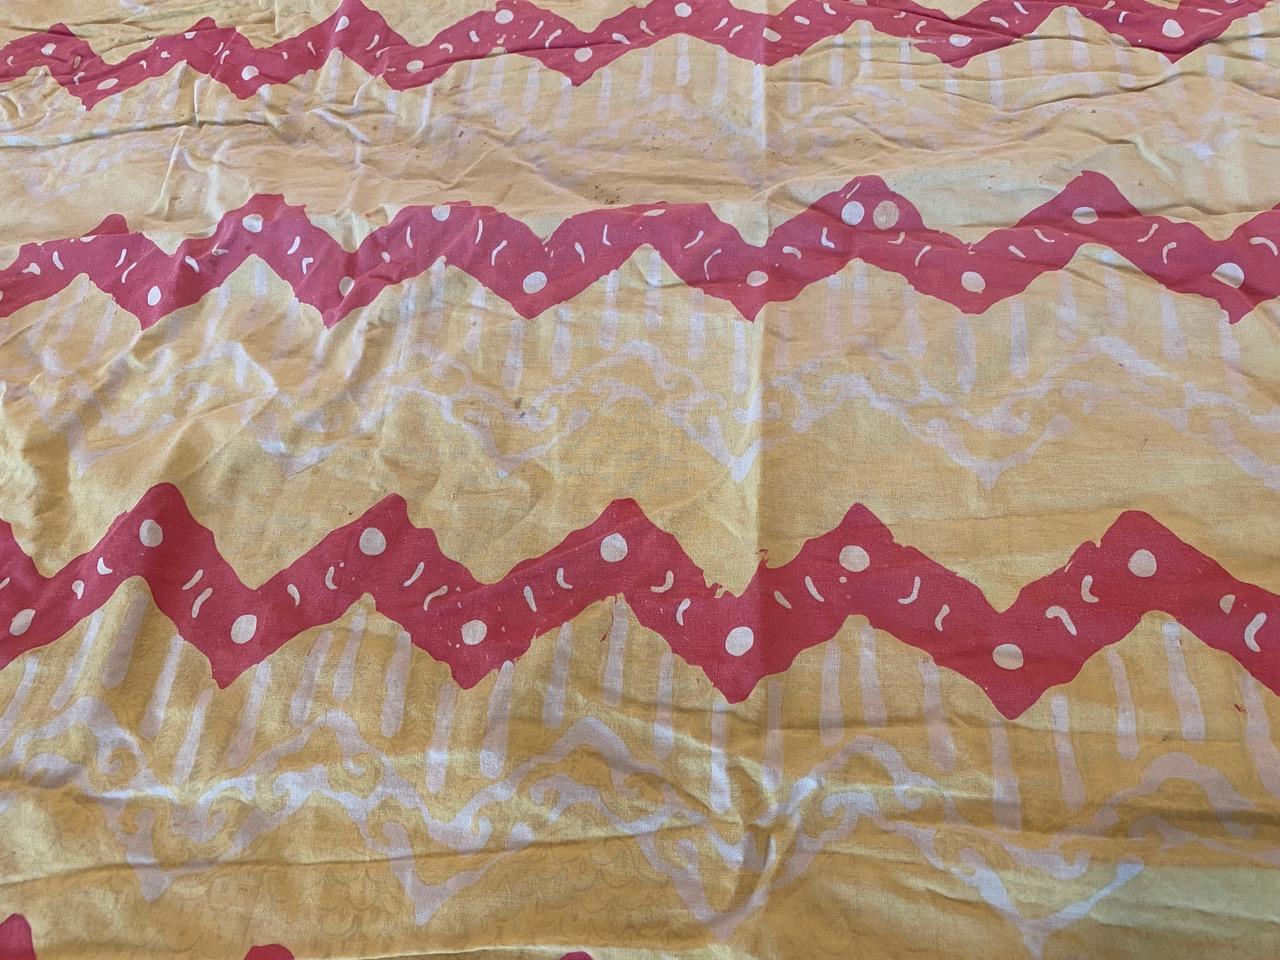 Andrianna Shamaris Antique Balinese Ceremonial Sarong In Good Condition For Sale In New York, NY